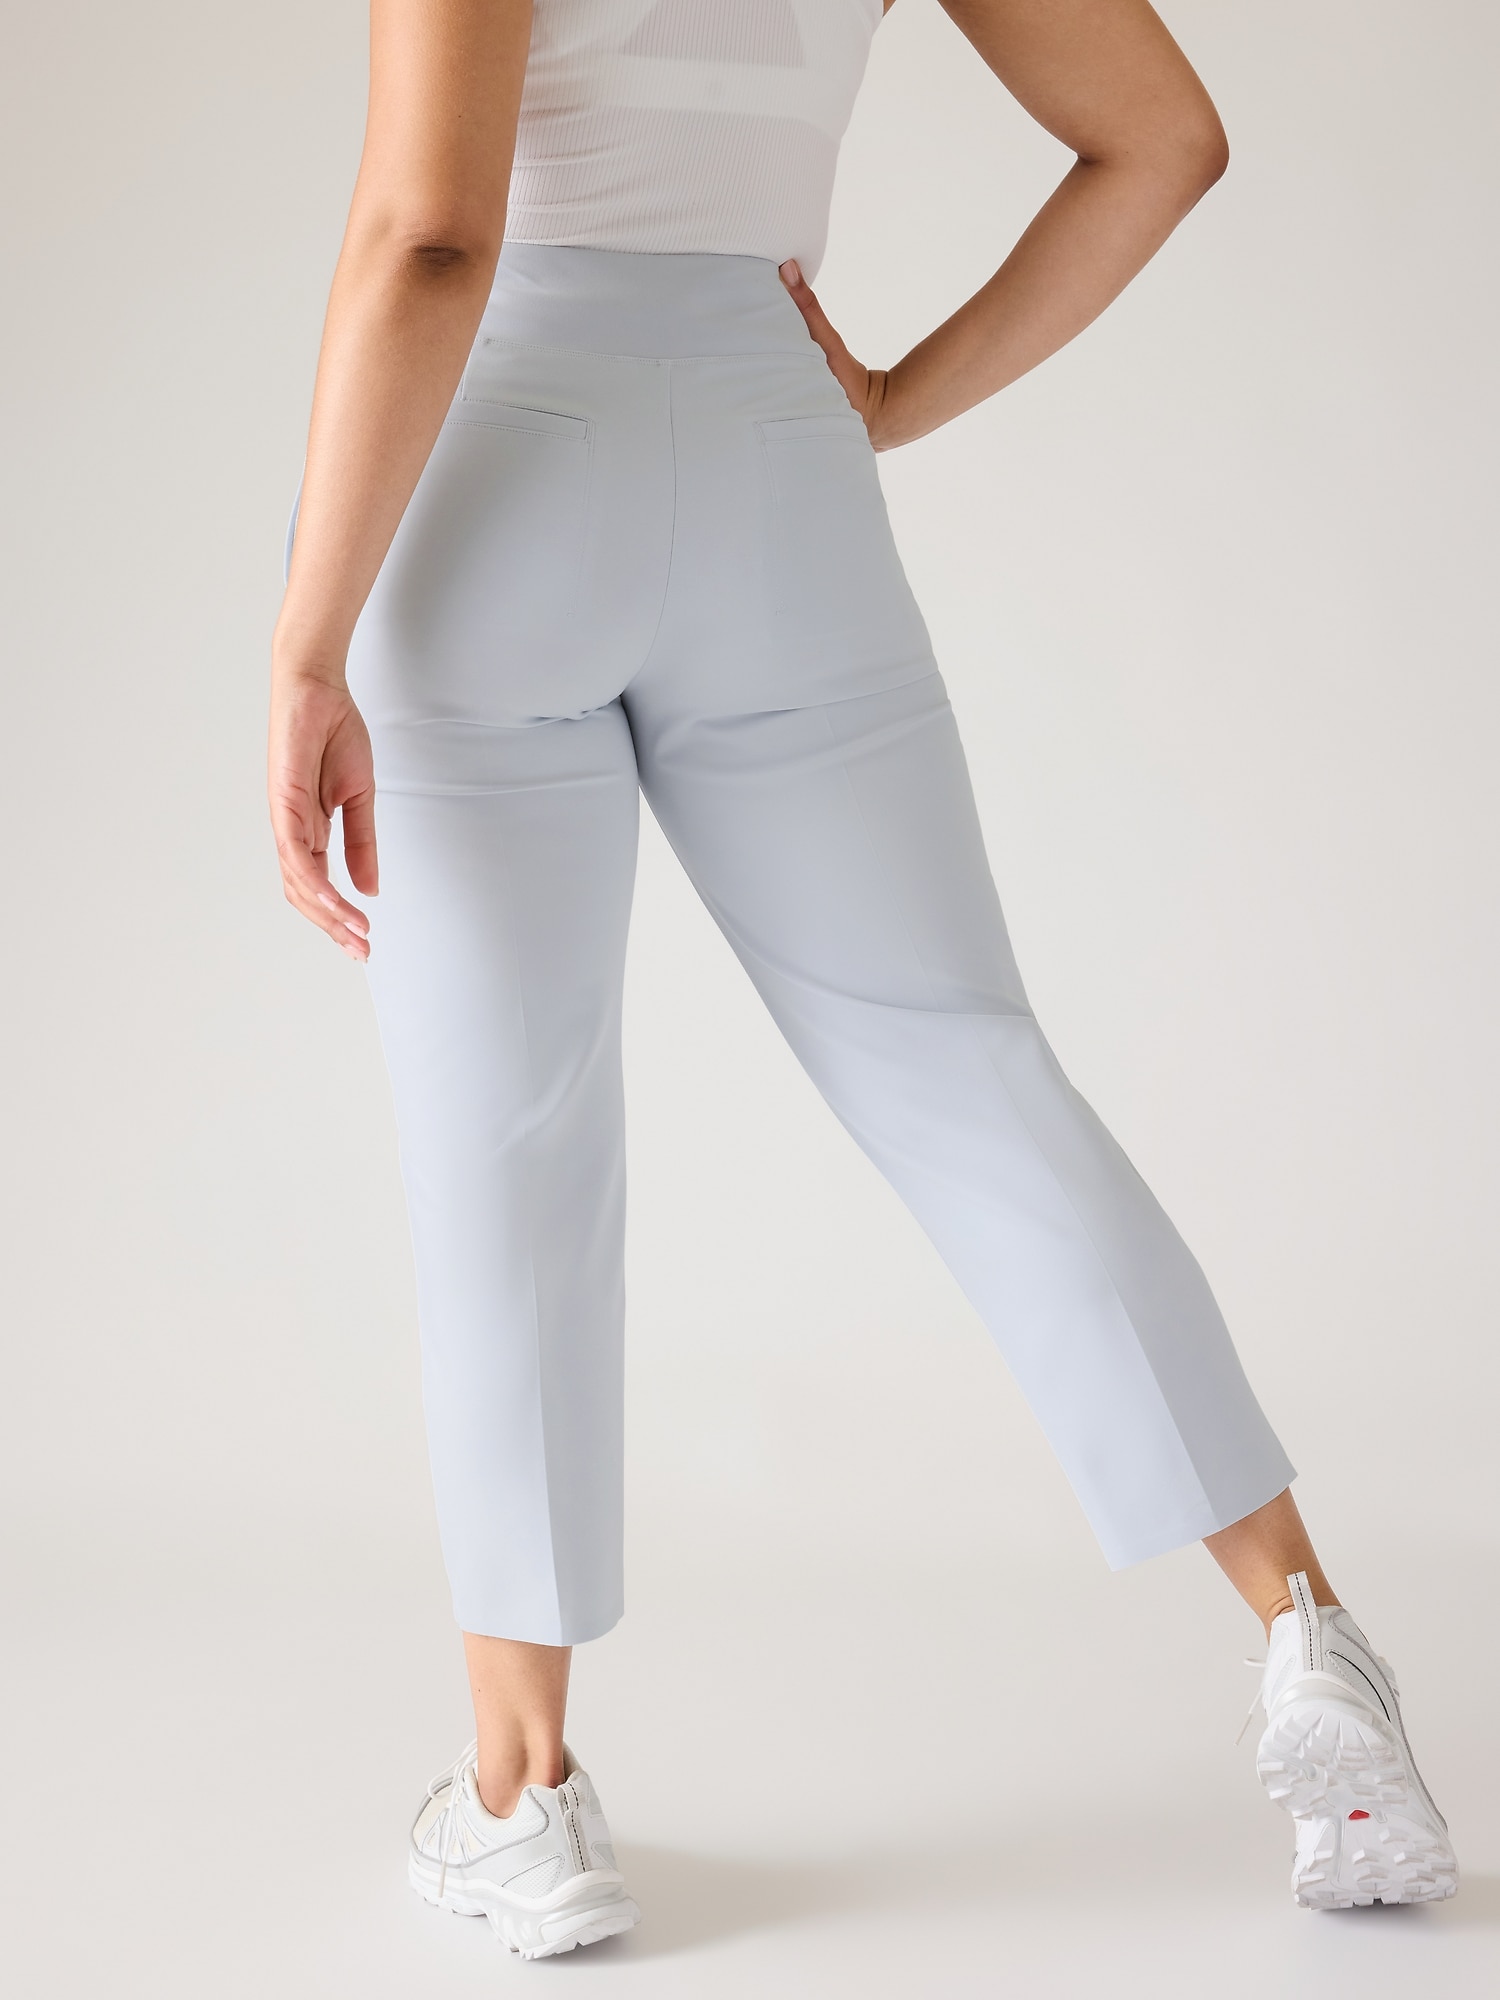 Athleta Ponte Moto 2.0 pants Navy Blue Leggings with Rose Gold Zippers  Women's 6 - $30 - From Curtsy